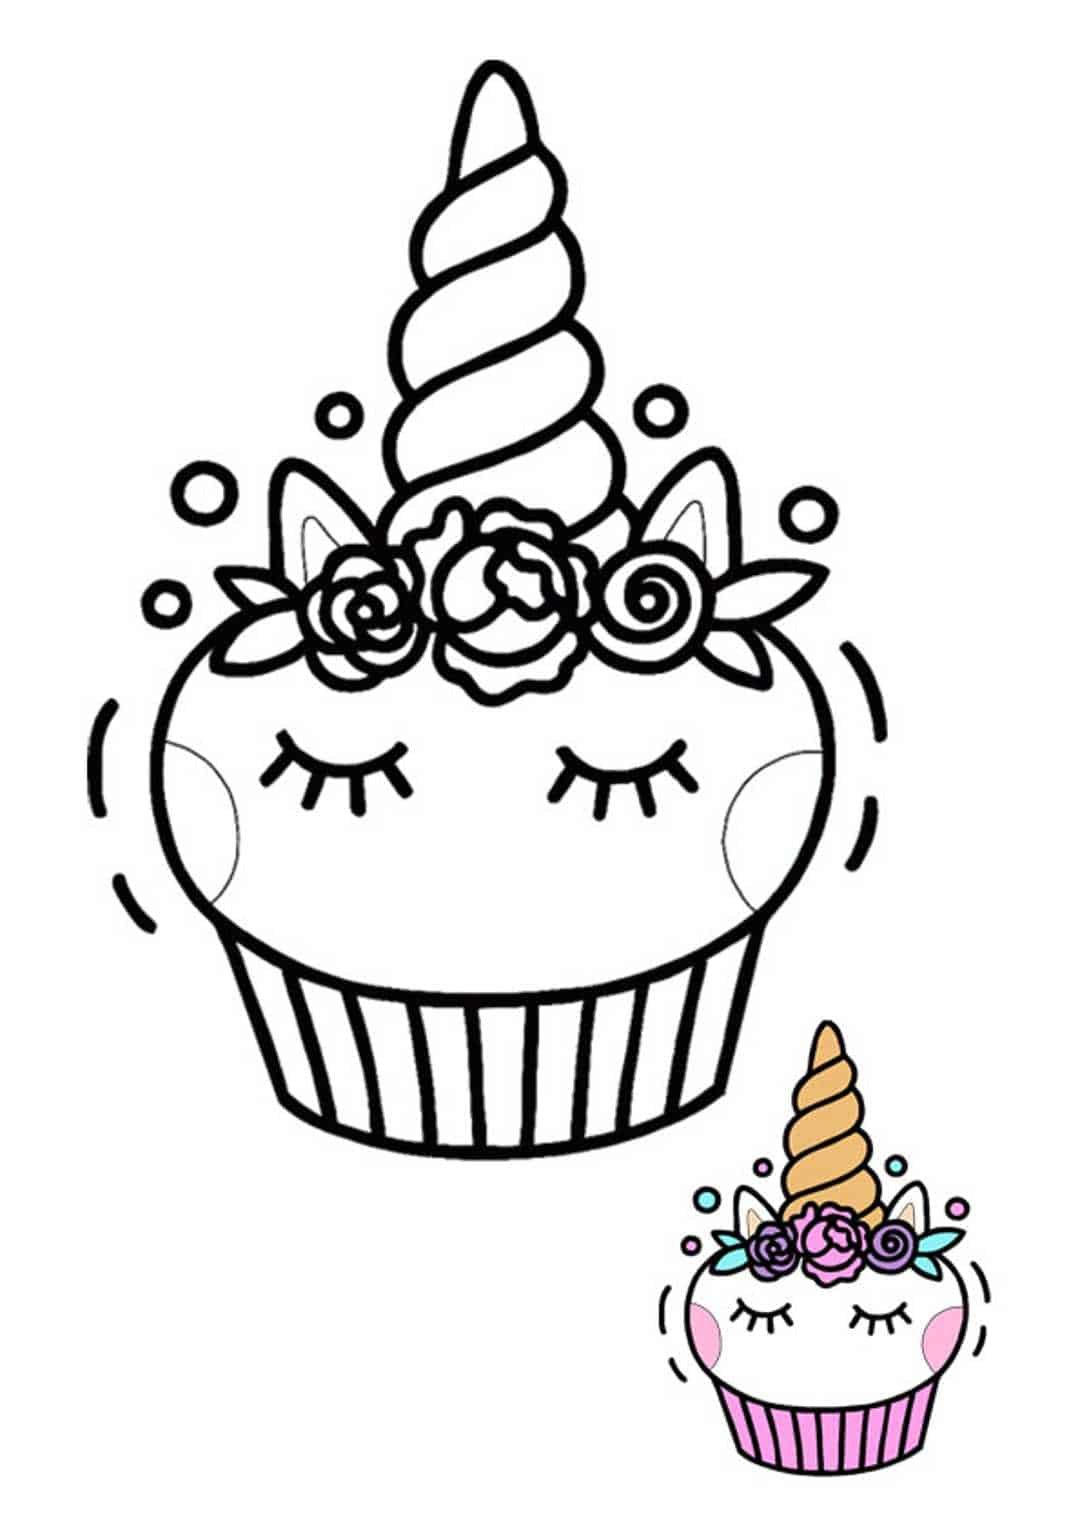 Cute unicorn cupcake coloring page with sample